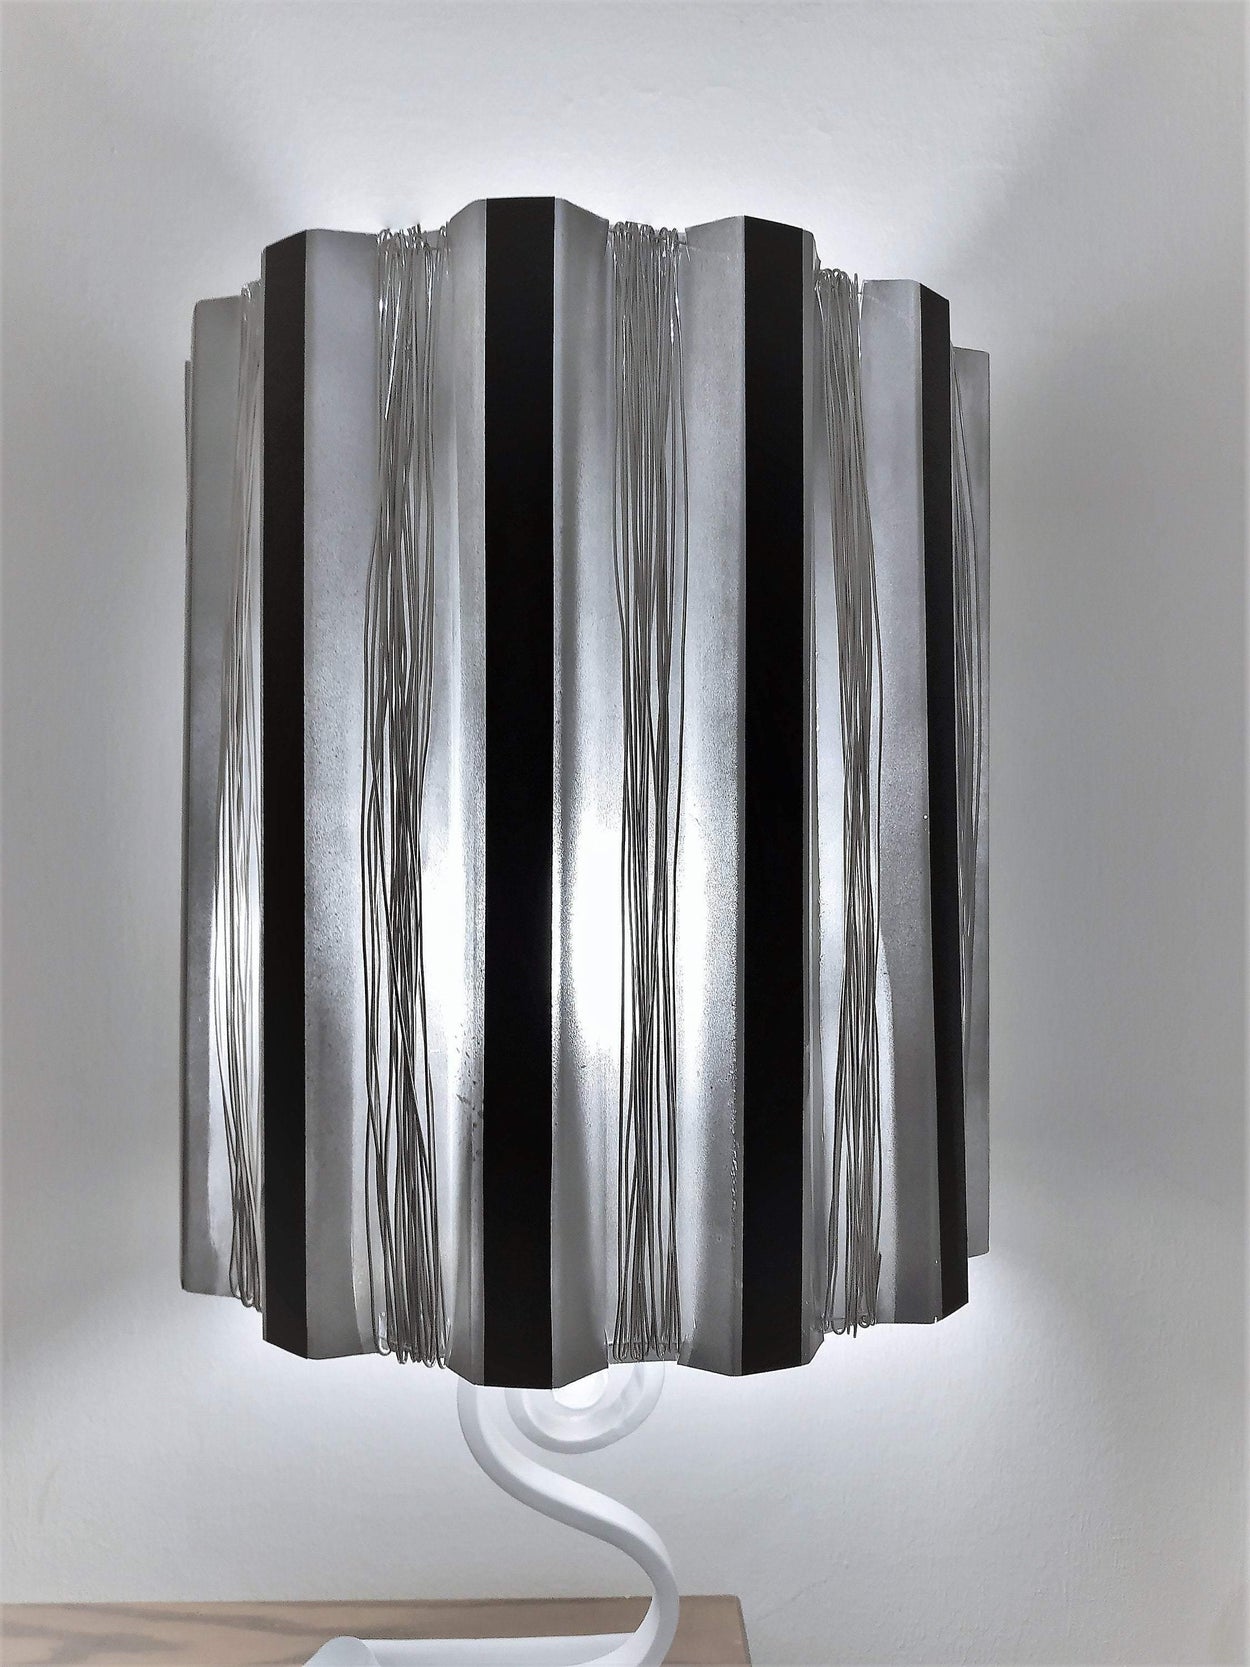 Exclusive modern shiny lampshade in techno style - GLEZANT designer goods store. 